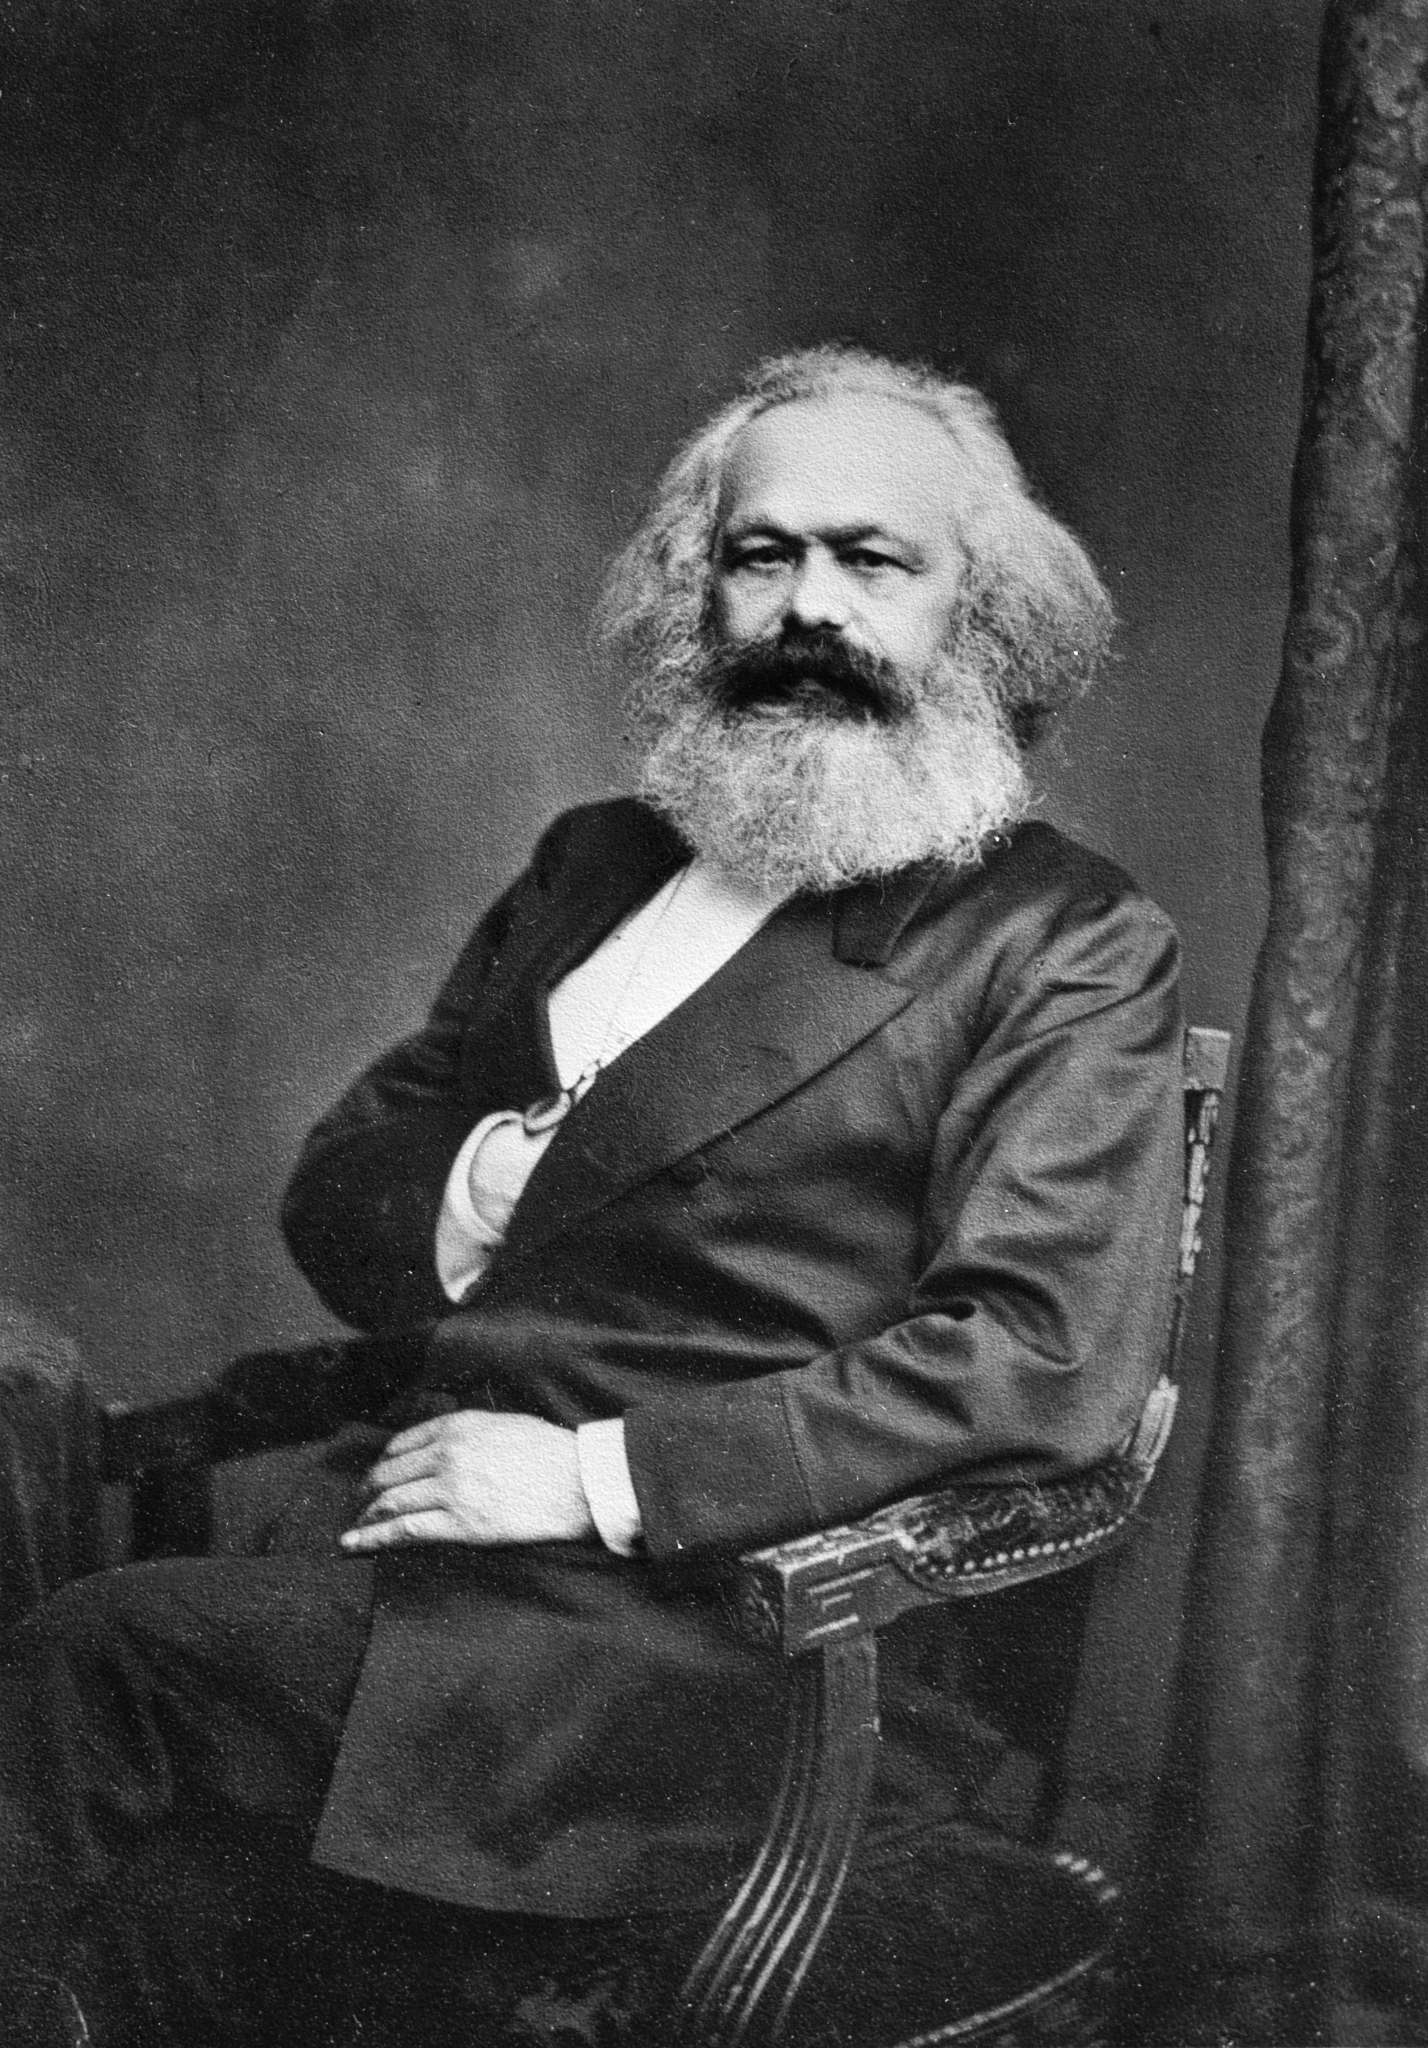 UNSPECIFIED - CIRCA 1865:  Karl Marx (1818-1883), philosopher and German politician.  (Photo by Roger Viollet Collection/Getty Images)